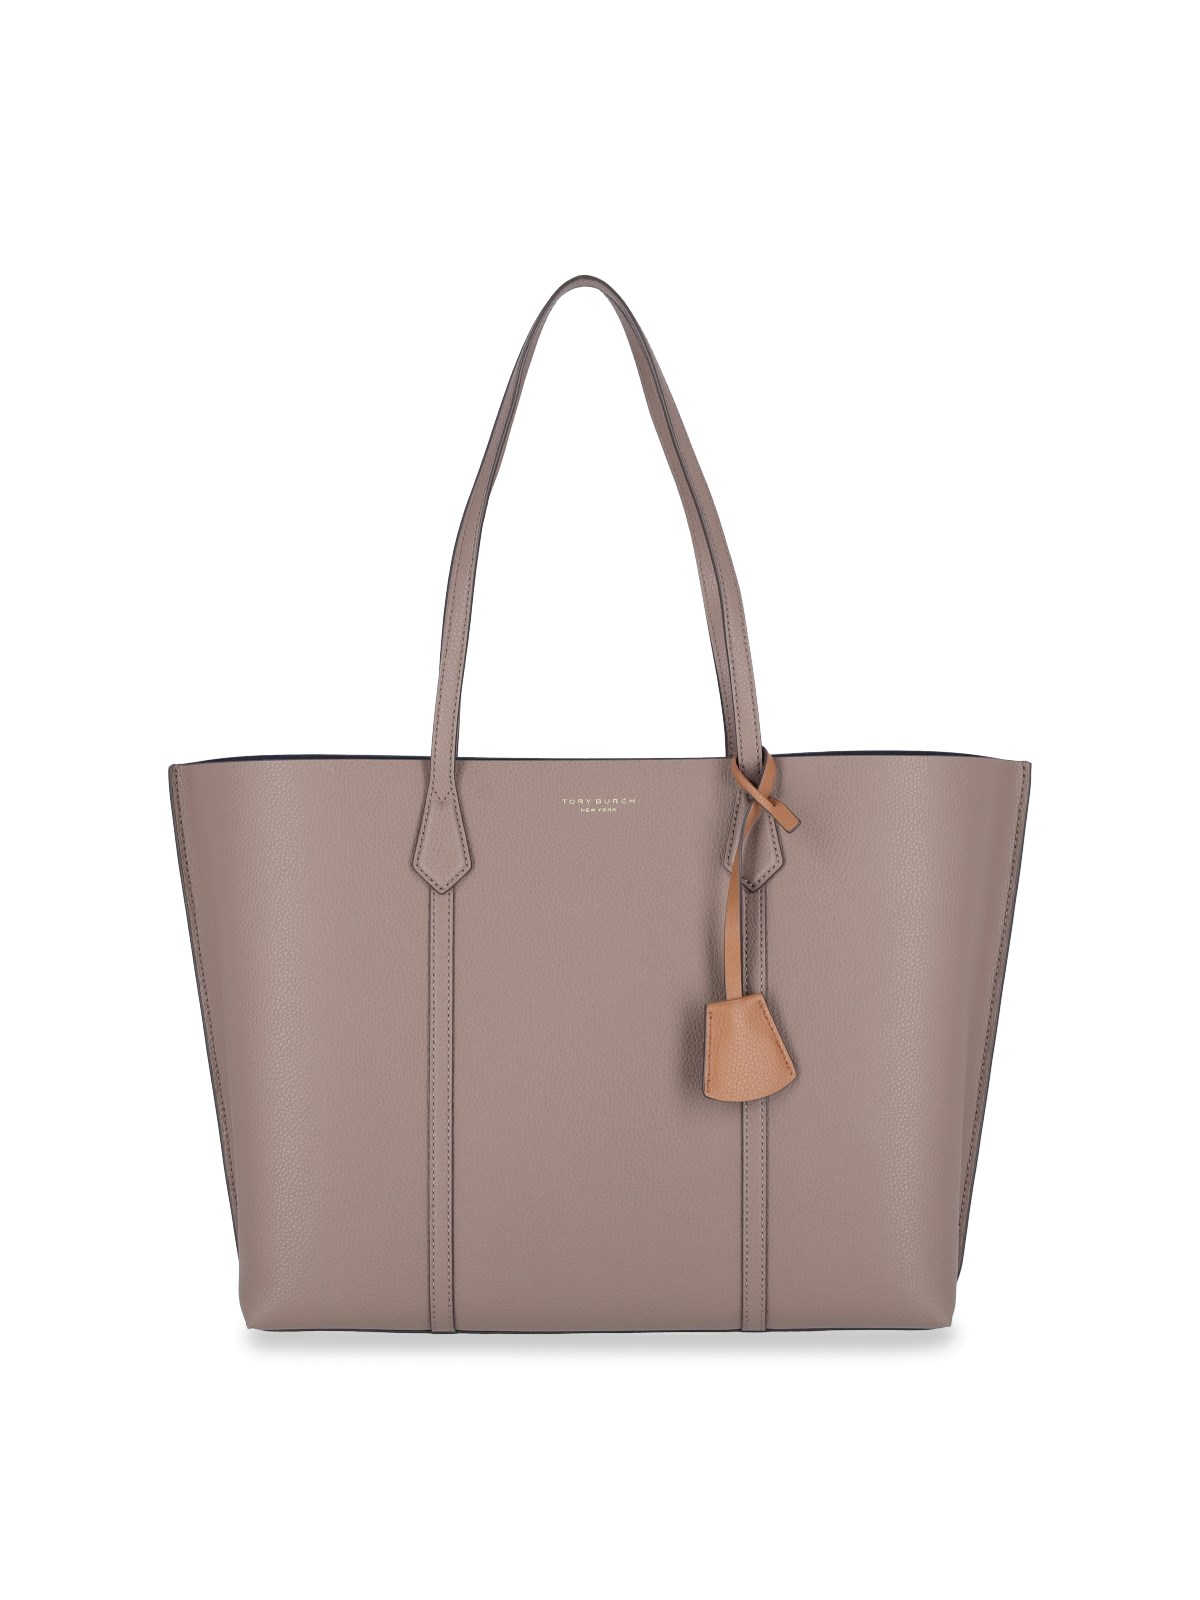 Tory Burch "perry" Tote Bag In Taupe